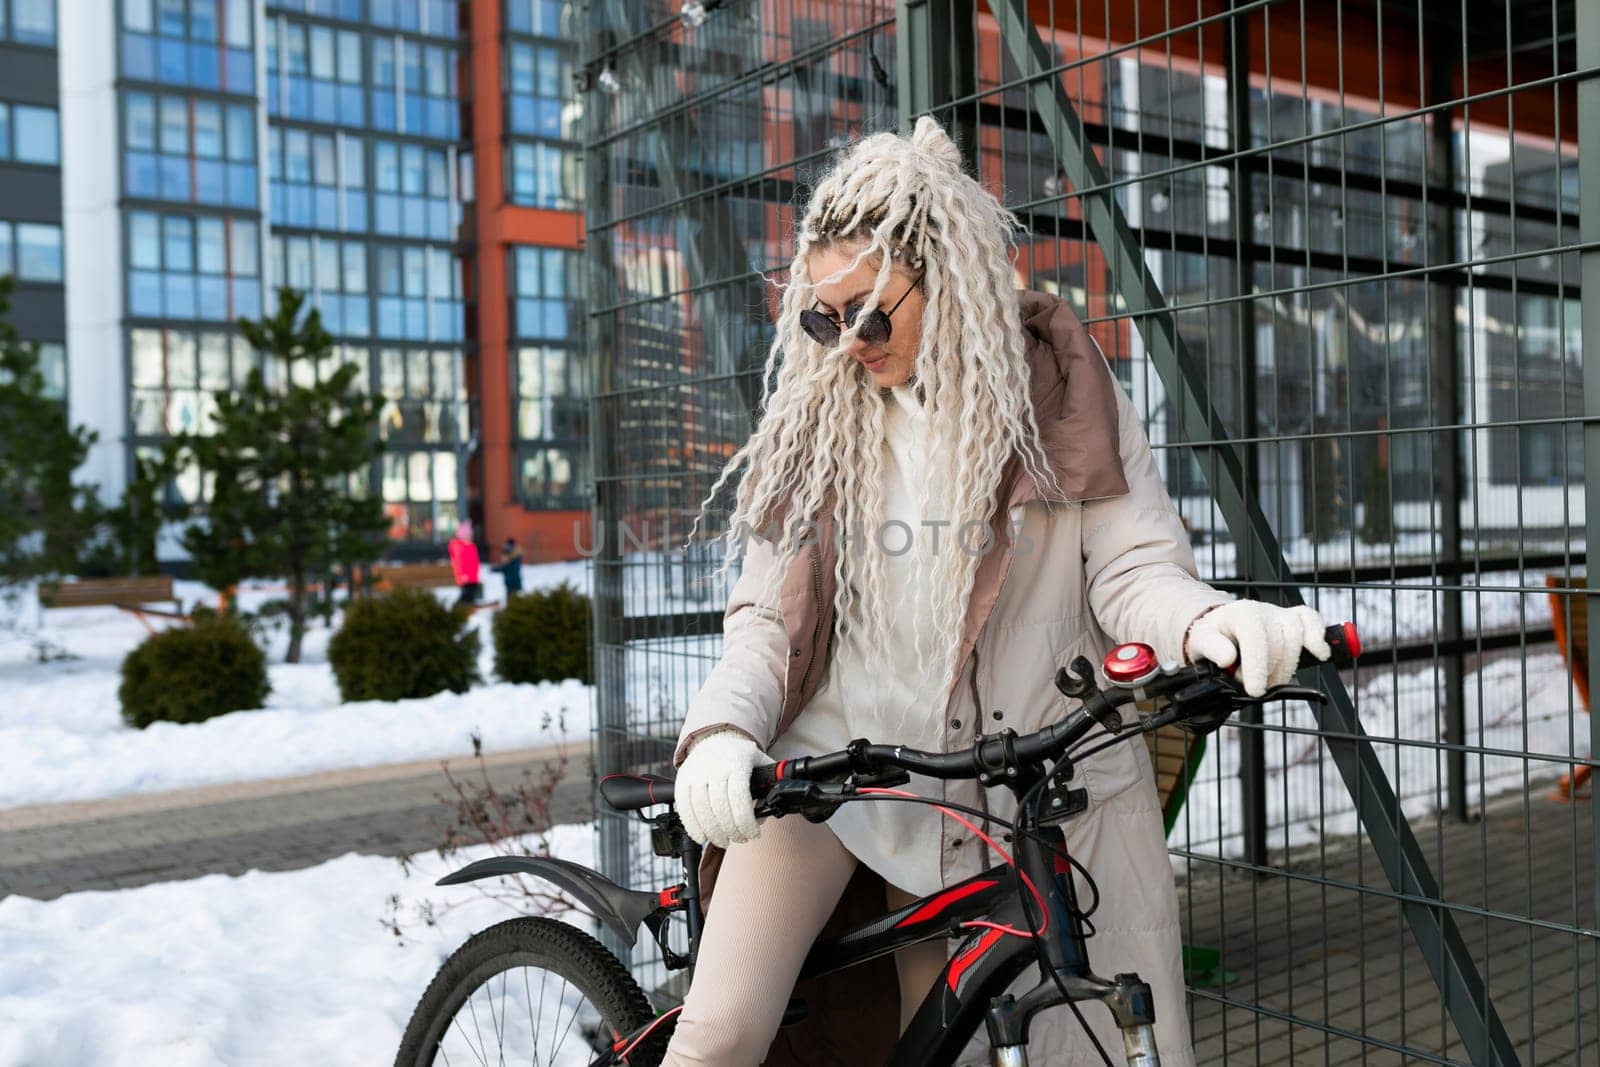 Woman With Long White Hair Riding Bike in Snow by TRMK